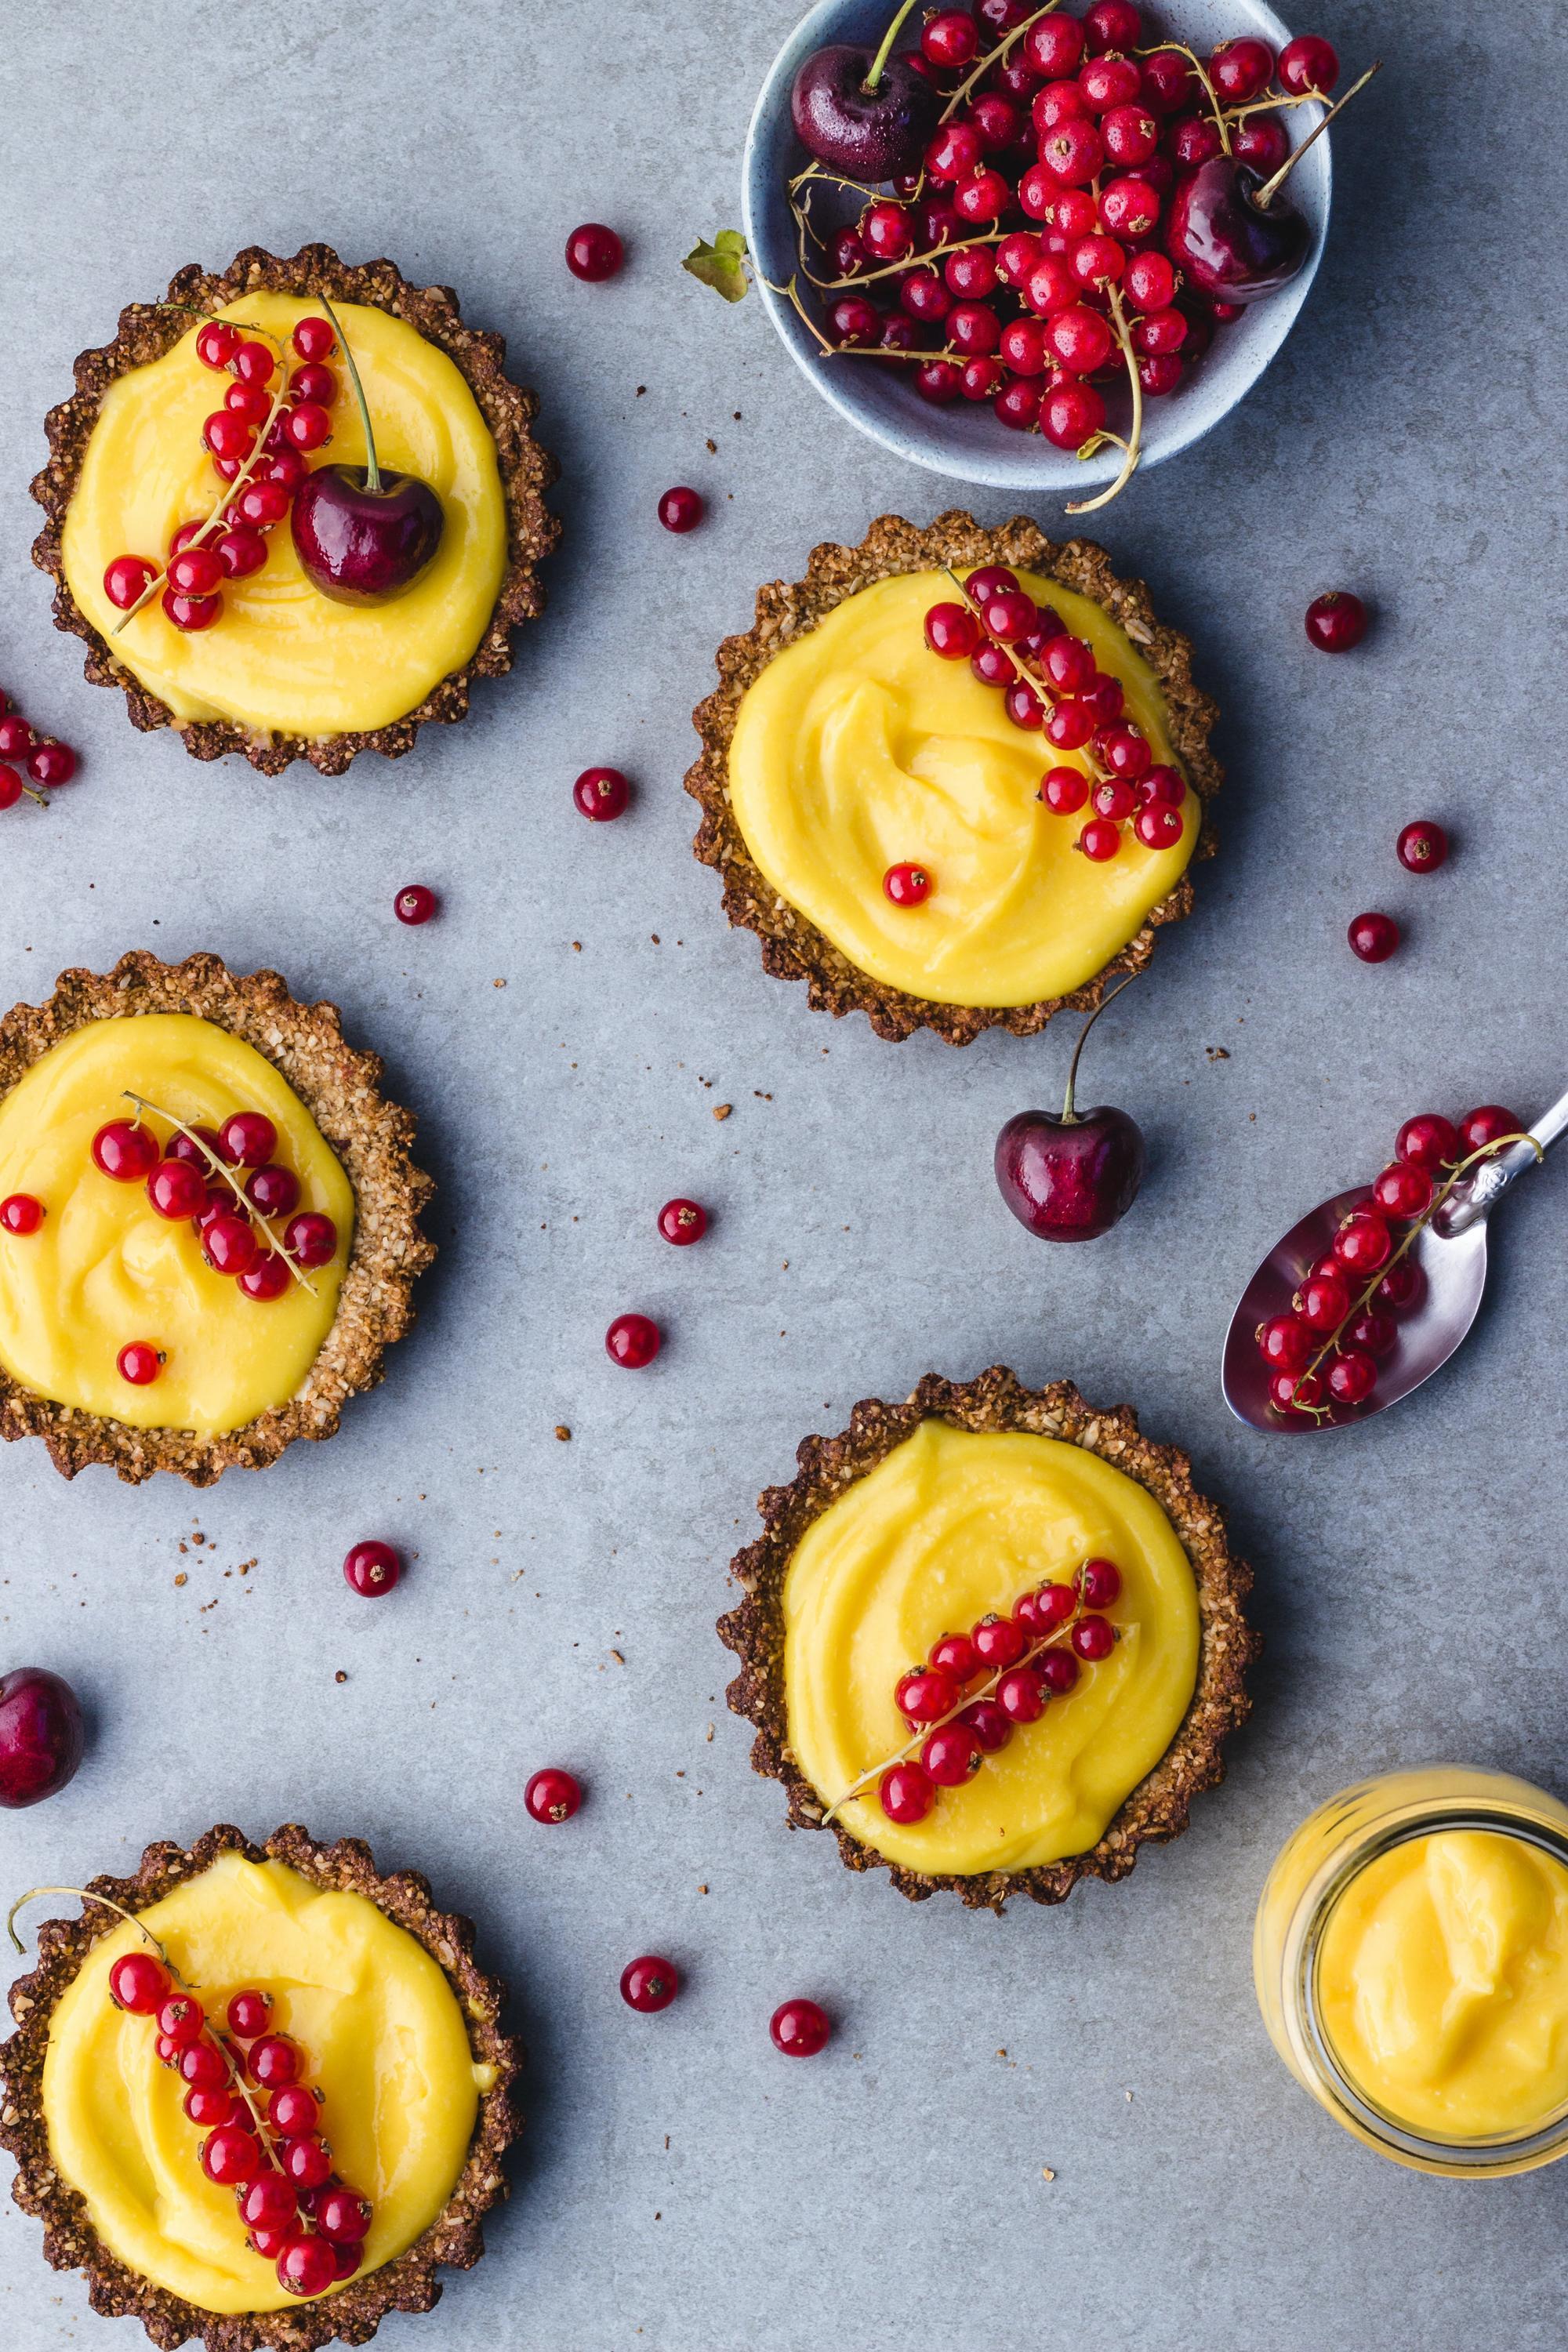 Tarts with lemon curd and red berries.